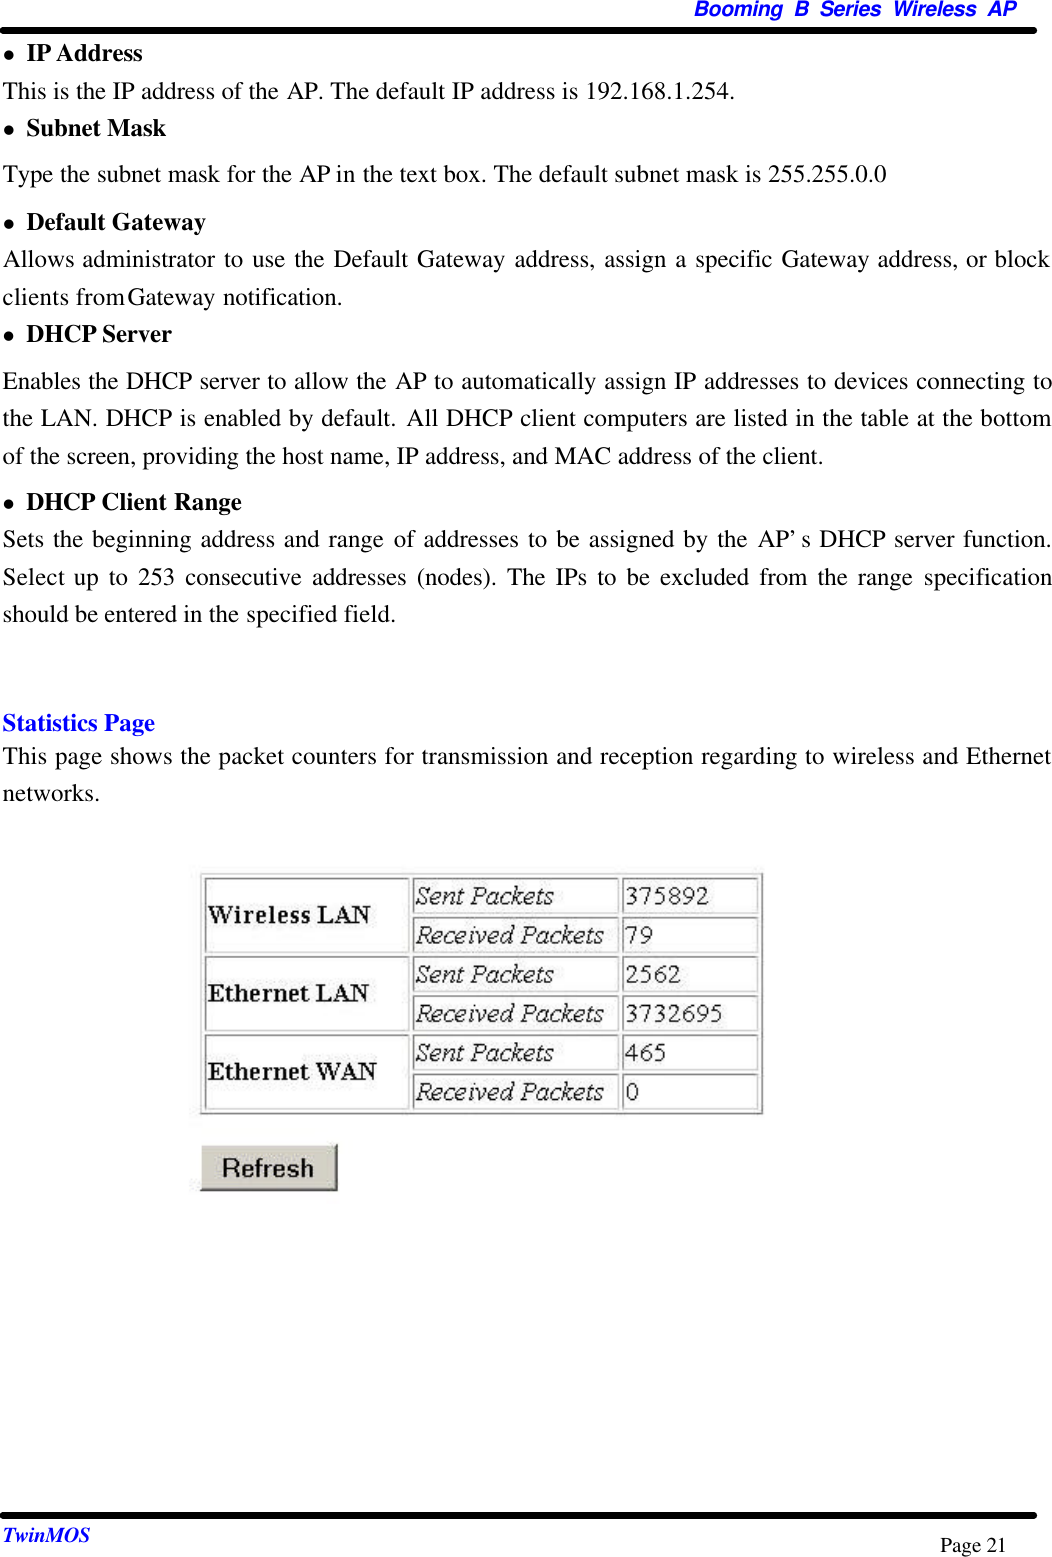  Booming B Series Wireless AP TwinMOS Page 21 l IP Address This is the IP address of the AP. The default IP address is 192.168.1.254. l Subnet Mask Type the subnet mask for the AP in the text box. The default subnet mask is 255.255.0.0   l Default Gateway   Allows administrator to use the Default Gateway address, assign a specific Gateway address, or block clients from Gateway notification. l DHCP Server   Enables the DHCP server to allow the AP to automatically assign IP addresses to devices connecting to the LAN. DHCP is enabled by default. All DHCP client computers are listed in the table at the bottom of the screen, providing the host name, IP address, and MAC address of the client.   l DHCP Client Range   Sets the beginning address and range of addresses to be assigned by the AP’s DHCP server function. Select up to 253 consecutive addresses (nodes). The IPs to be excluded from the range specification should be entered in the specified field.   Statistics Page This page shows the packet counters for transmission and reception regarding to wireless and Ethernet networks.                   